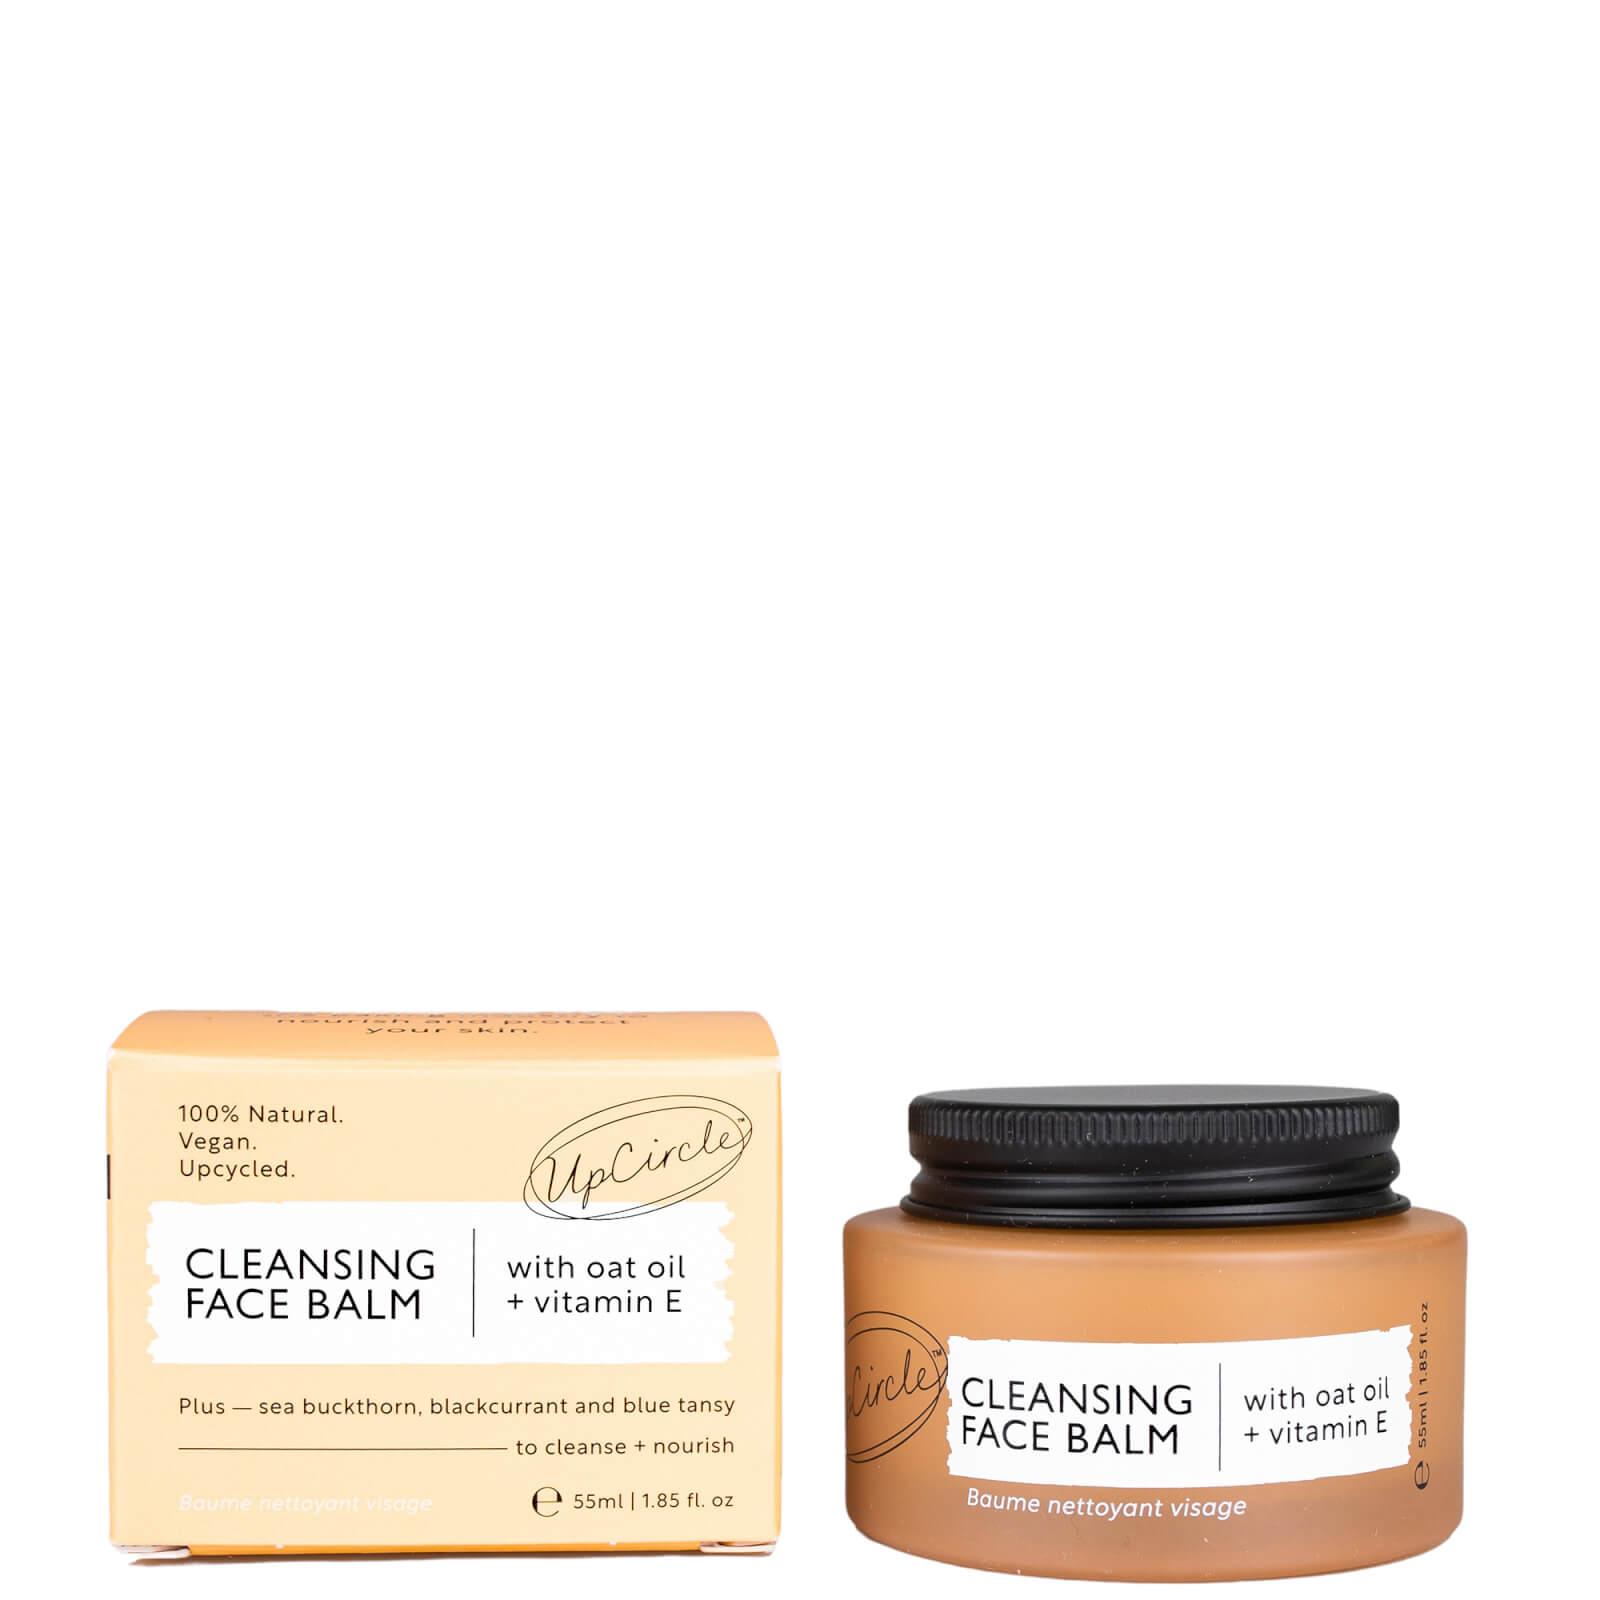 Upcircle Cleansing Face Balm With Apricot Powder 50ml In White